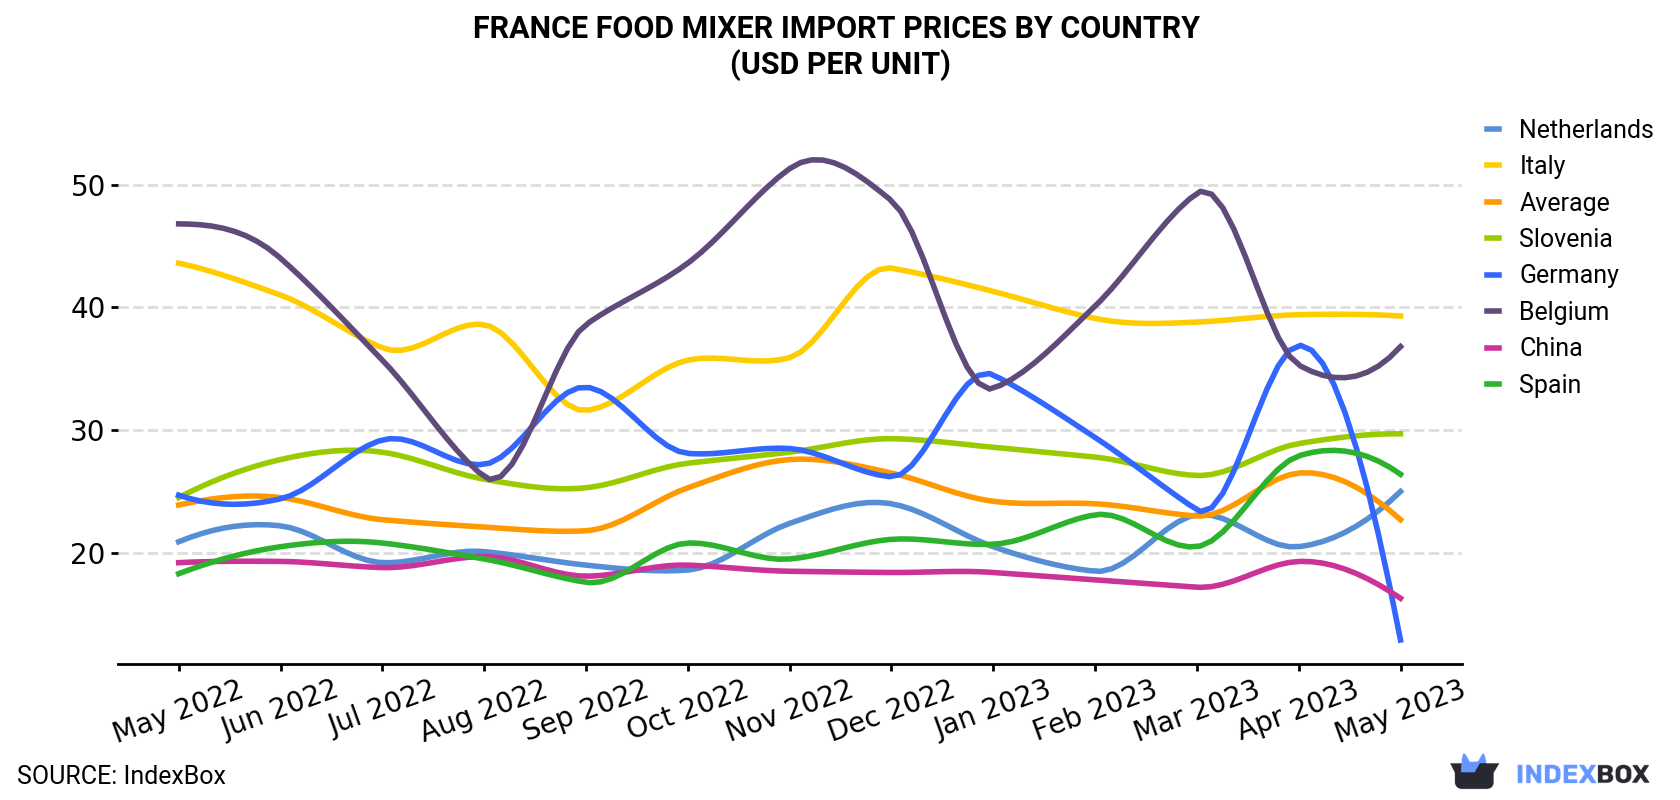 France Food Mixer Import Prices By Country (USD Per Unit)